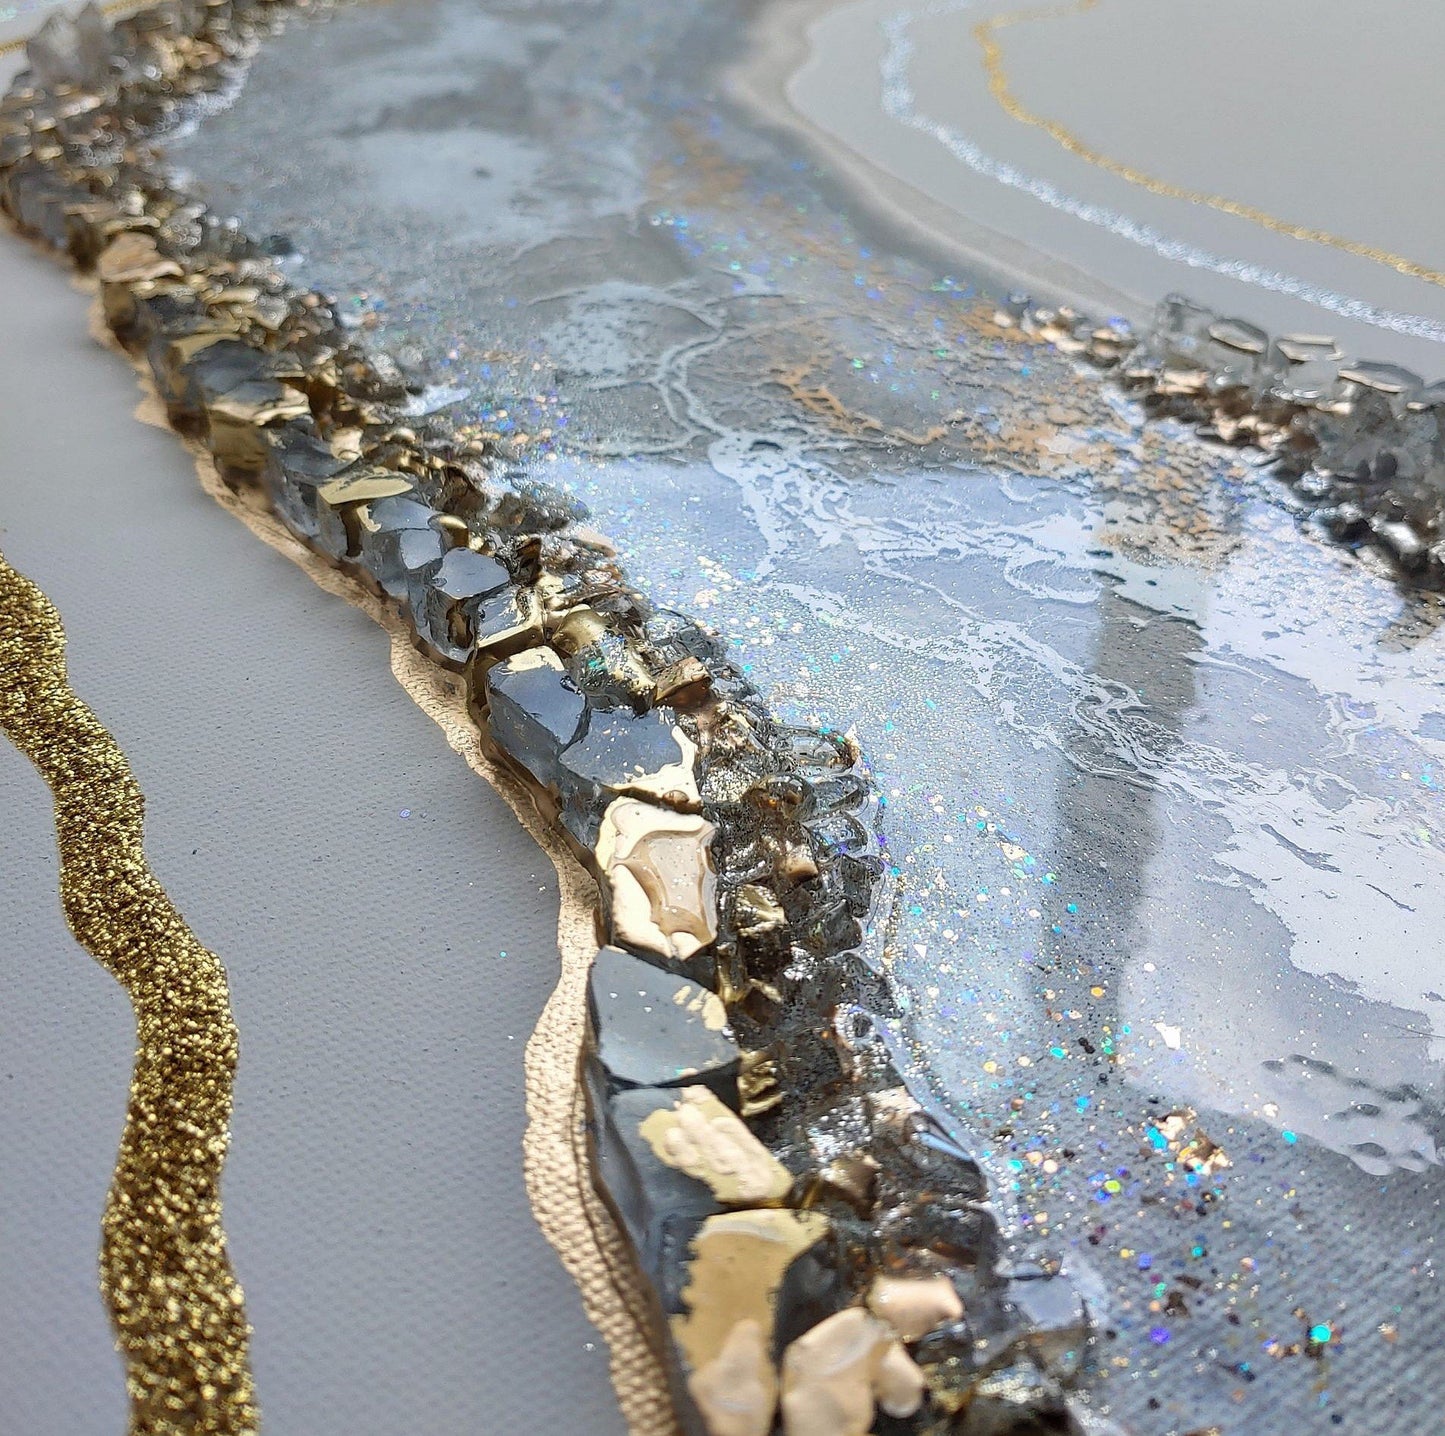 Silver Linings Deux with acrylic, resin, glass and crystals